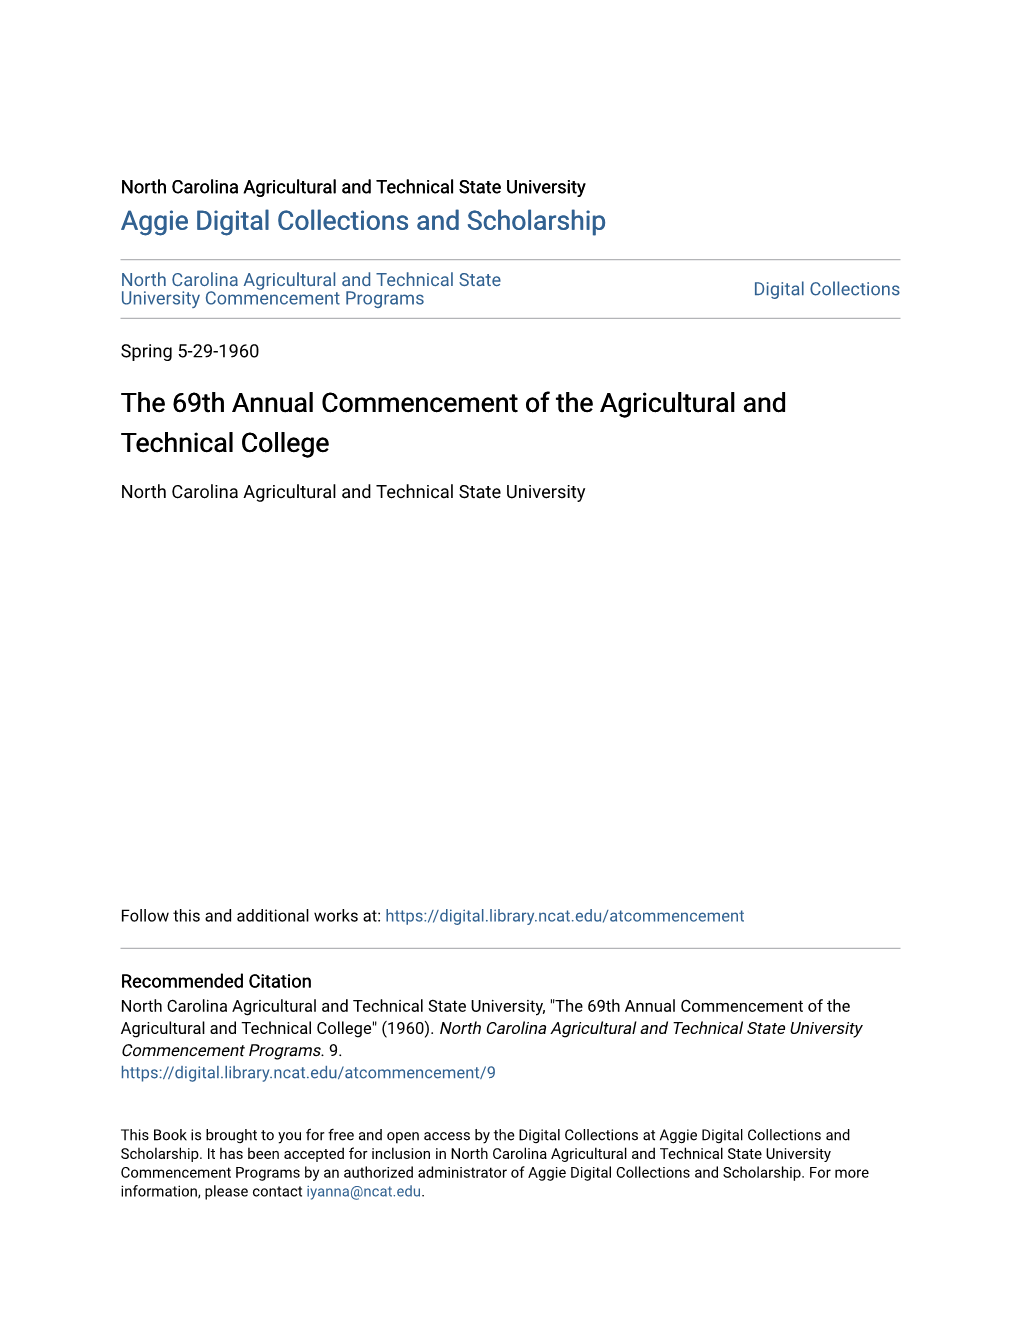 The 69Th Annual Commencement of the Agricultural and Technical College